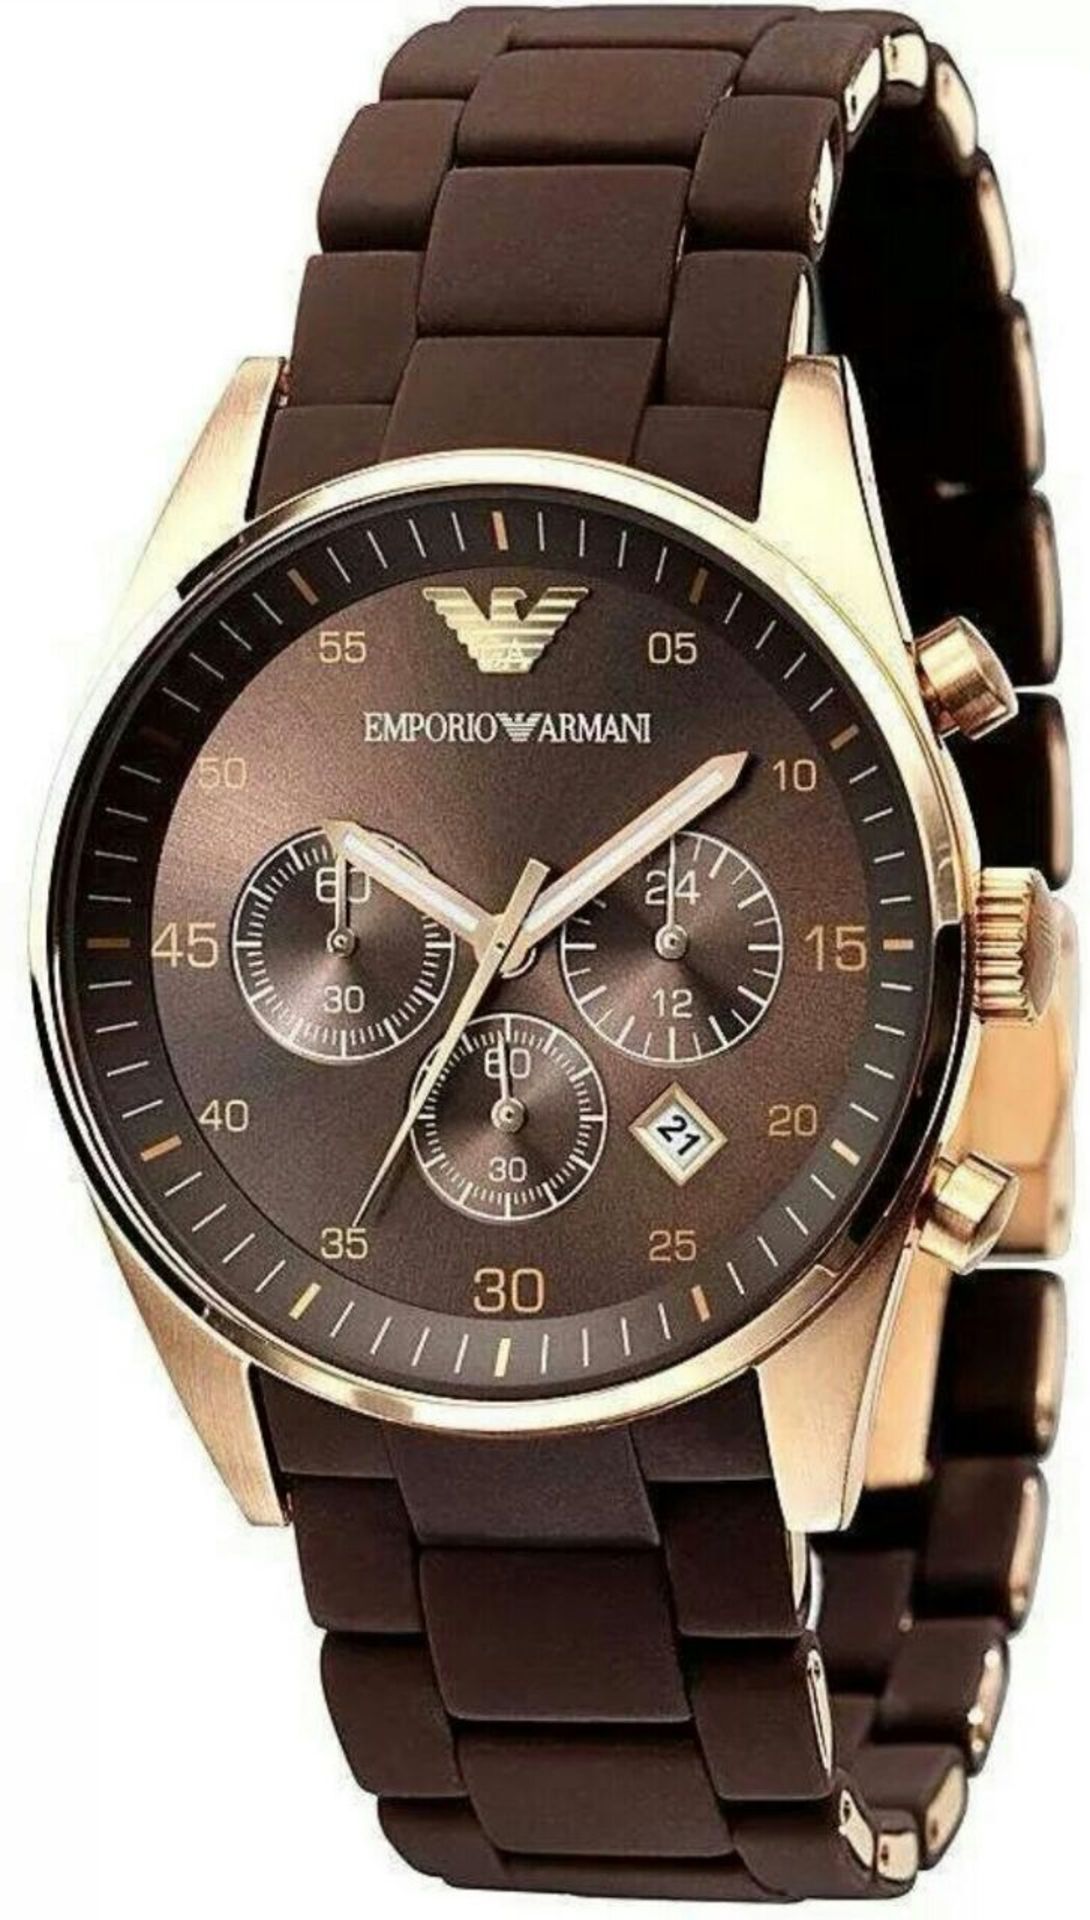 BRAND NEW EMPORIO ARMANI AR5891, LADIES SPORTIVO CHRONOGRAPH WATCH, WITH A BROWN SILICONE OVER STEEL